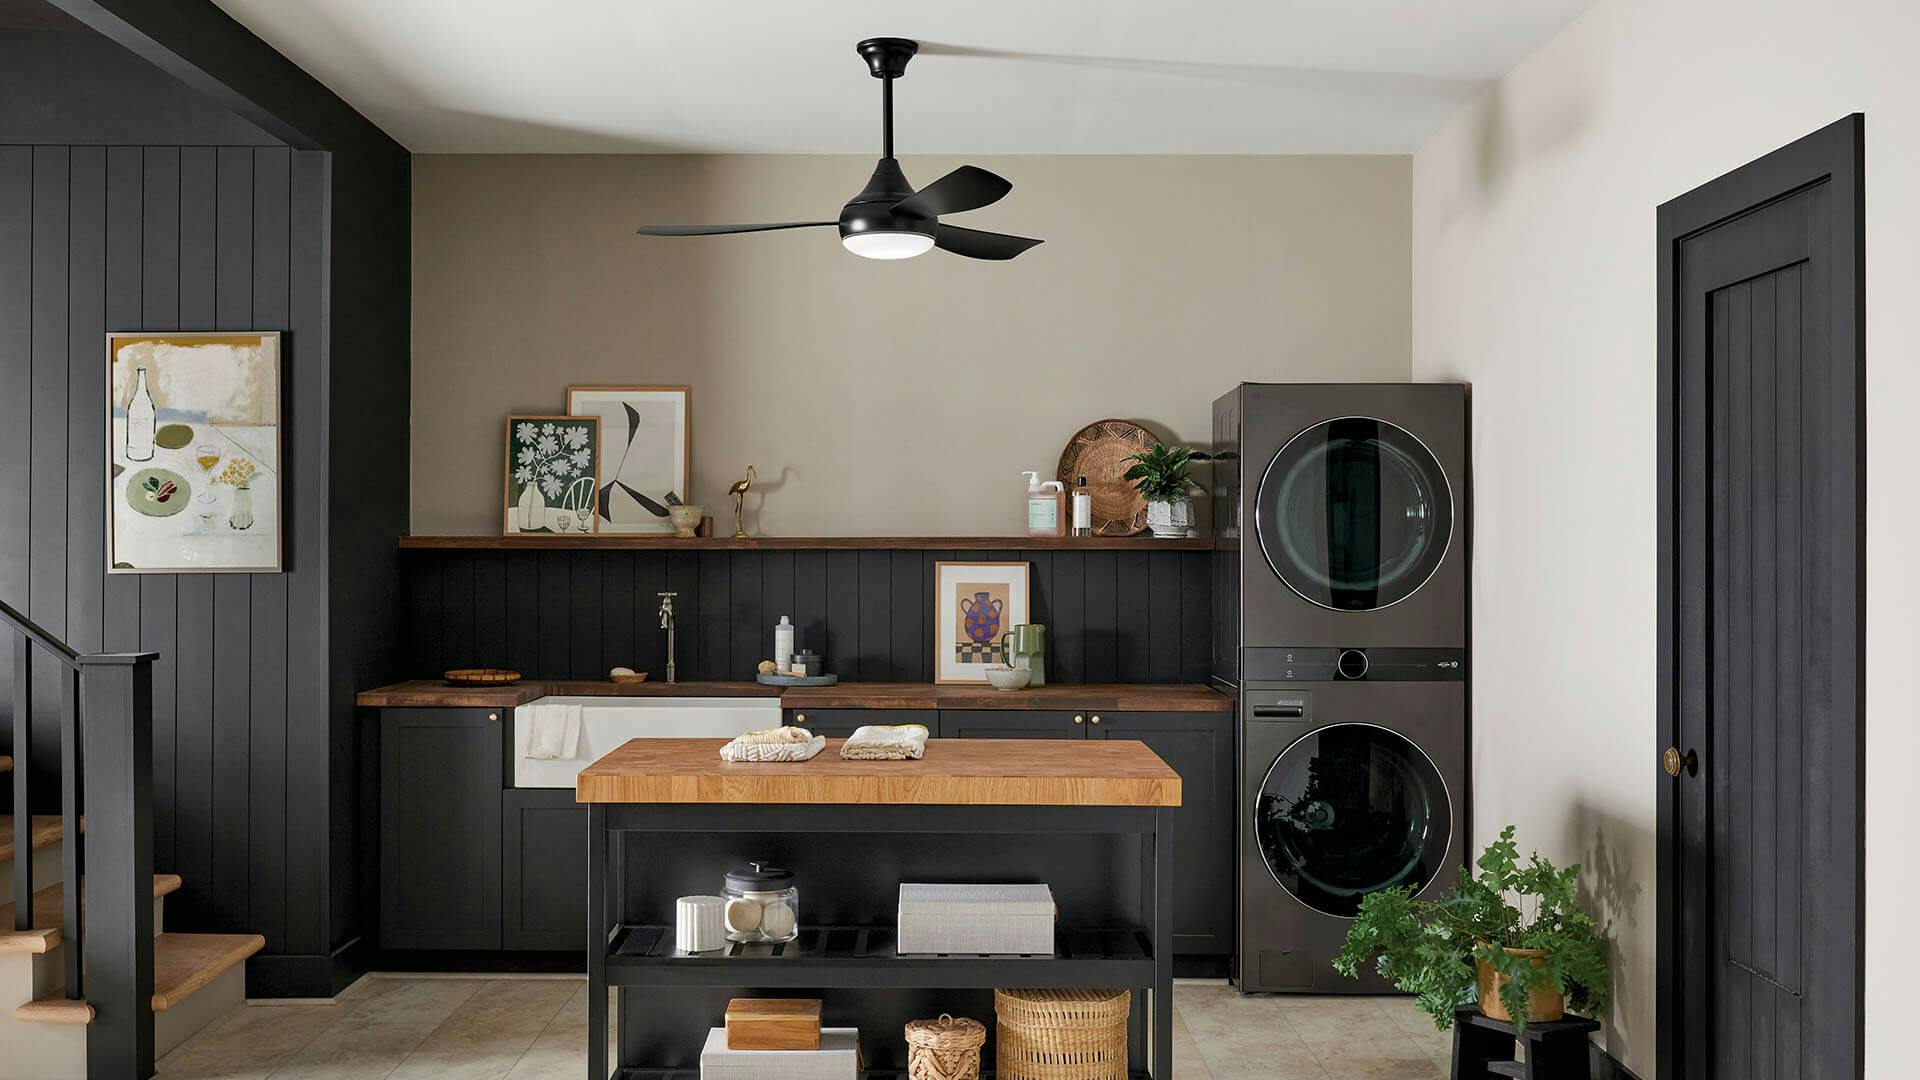 A downstairs laundry room with dark paneled walls featuring a black ample ceiling fan in the center.